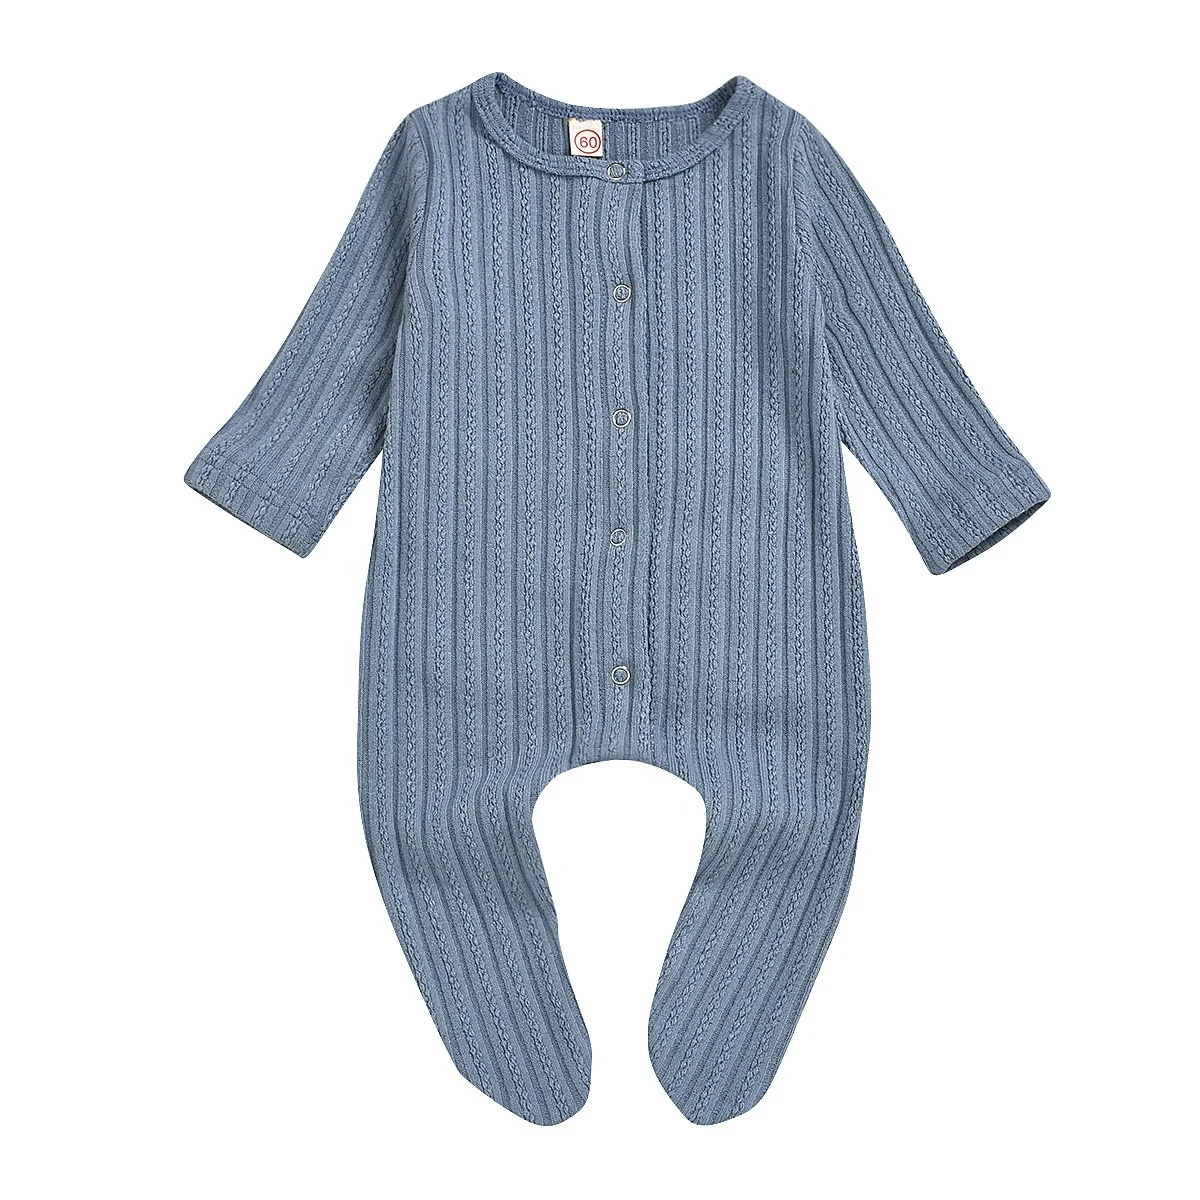 
Hot sale Baby One Piece Clothing 100% cotton Romper Infant Footed Overall baby Pajamas 